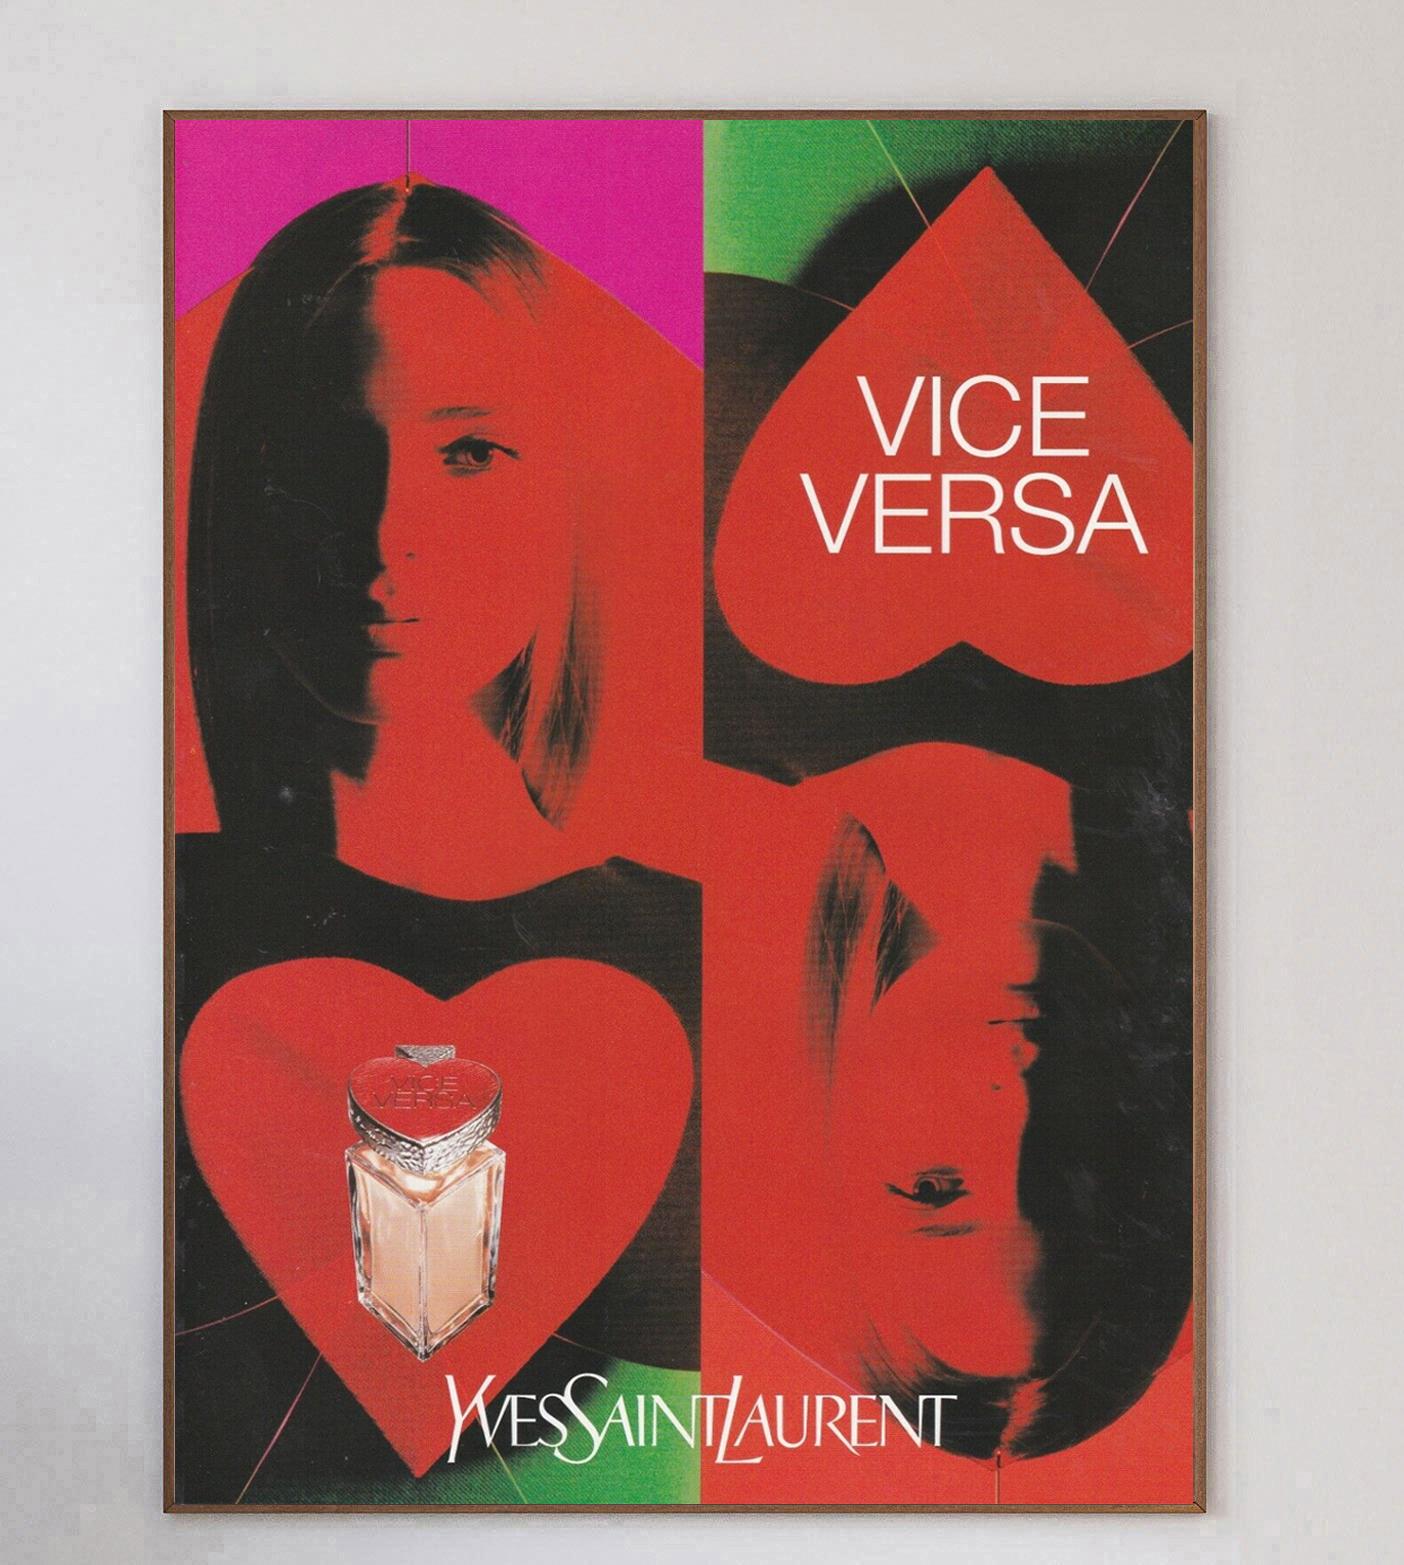 Beautiful extra-large poster for the Yves Saint Laurent fragrance 